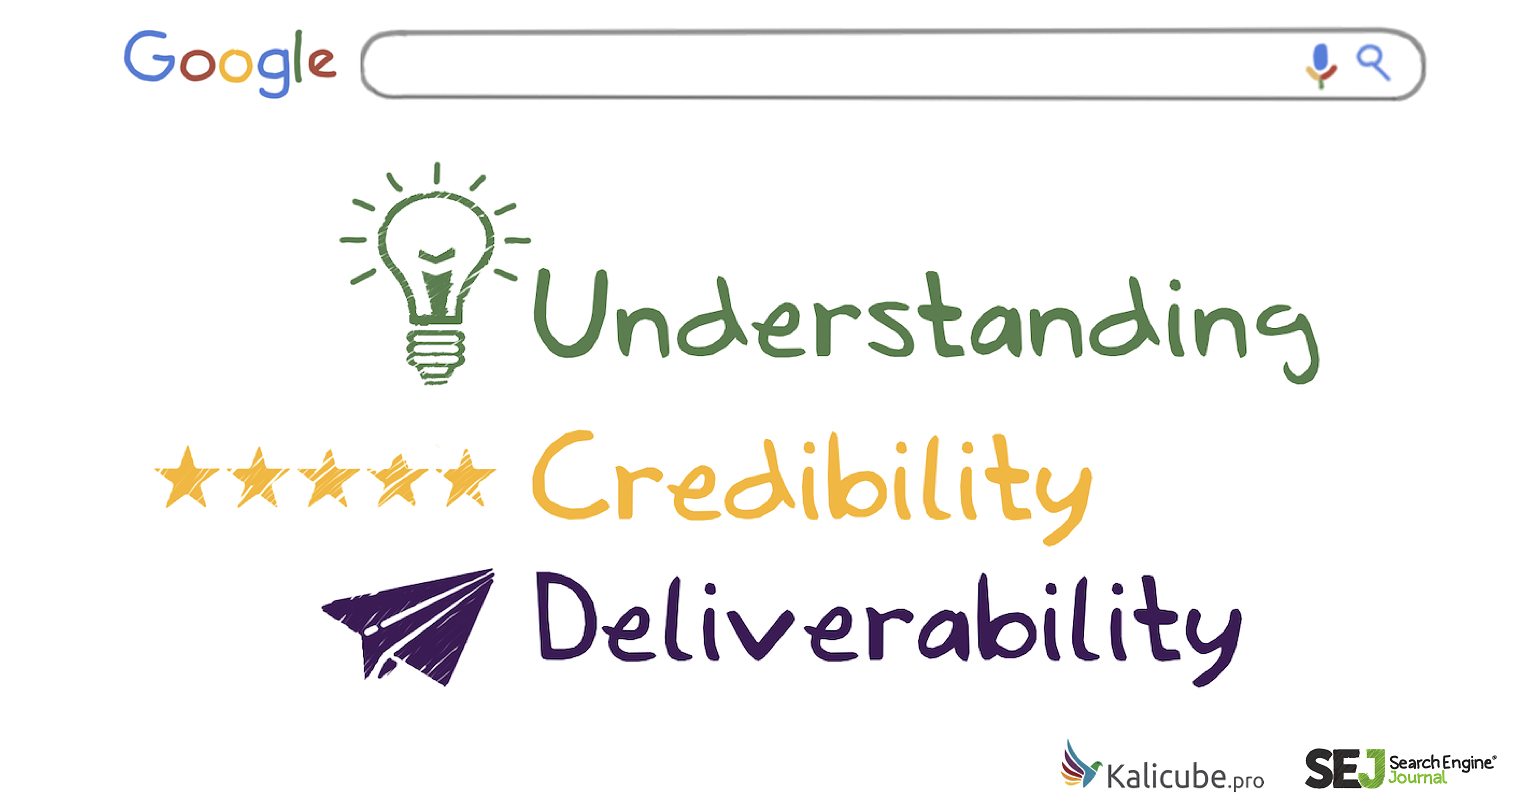 SEO in a Nutshell: Understanding, Credibility & Deliverability